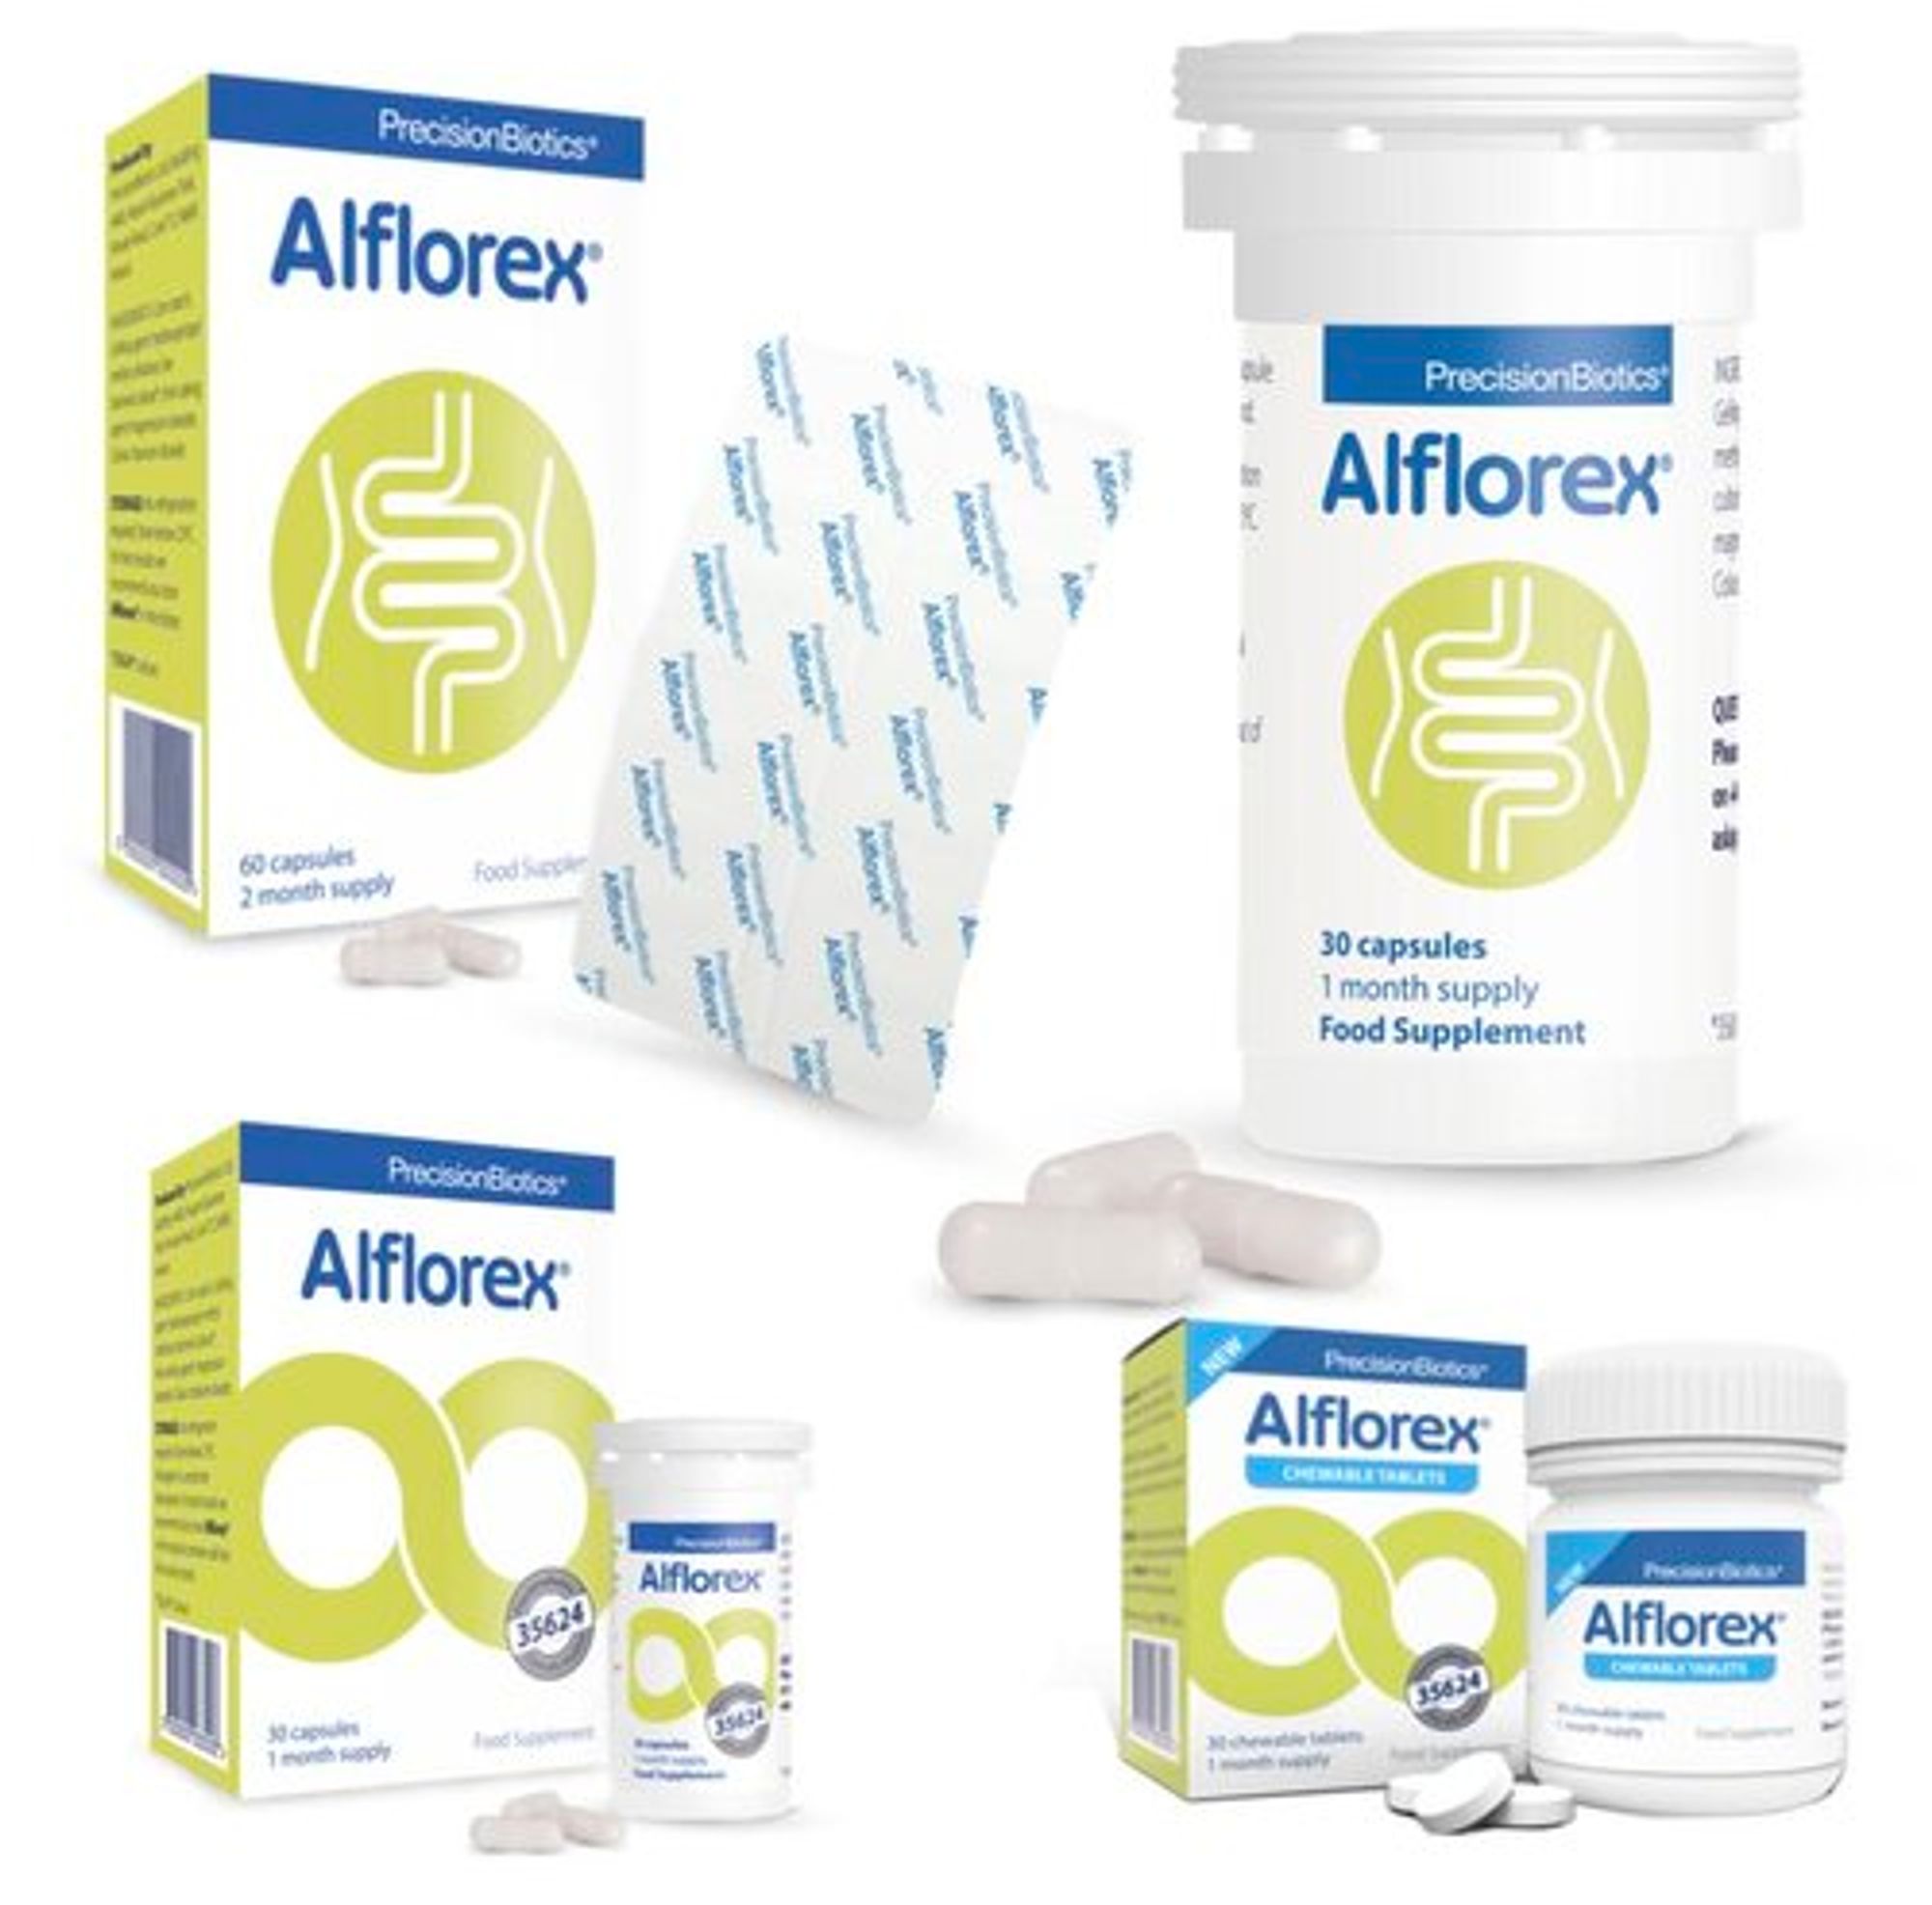 Figure 2: Images of the old Alflorex branding. There are four different examples of Alflorex packaging in this image. All of the packaging is blue, green and white. At the top right there is an Alflorex box showing the shape of a stomach and intestines in the background, with a blister pack of and 3 pill capsules in the foreground. At the top left there is a cylindrical, child-locked bottle with a few pill capsules in front. At the bottom right, there is different Alflorex packaging with the shape of an infinity sign and stamp saying the bacterial strain has been researched in clinical trials on. In front of this is another cylindrical, child-locked bottle and pill capsules. Finally, on the bottom left there is another Alflorex box with the infinity sign and clinical trial stamp. This is beside a small pill bottle with blue Alflorex branding and three circular pills. 